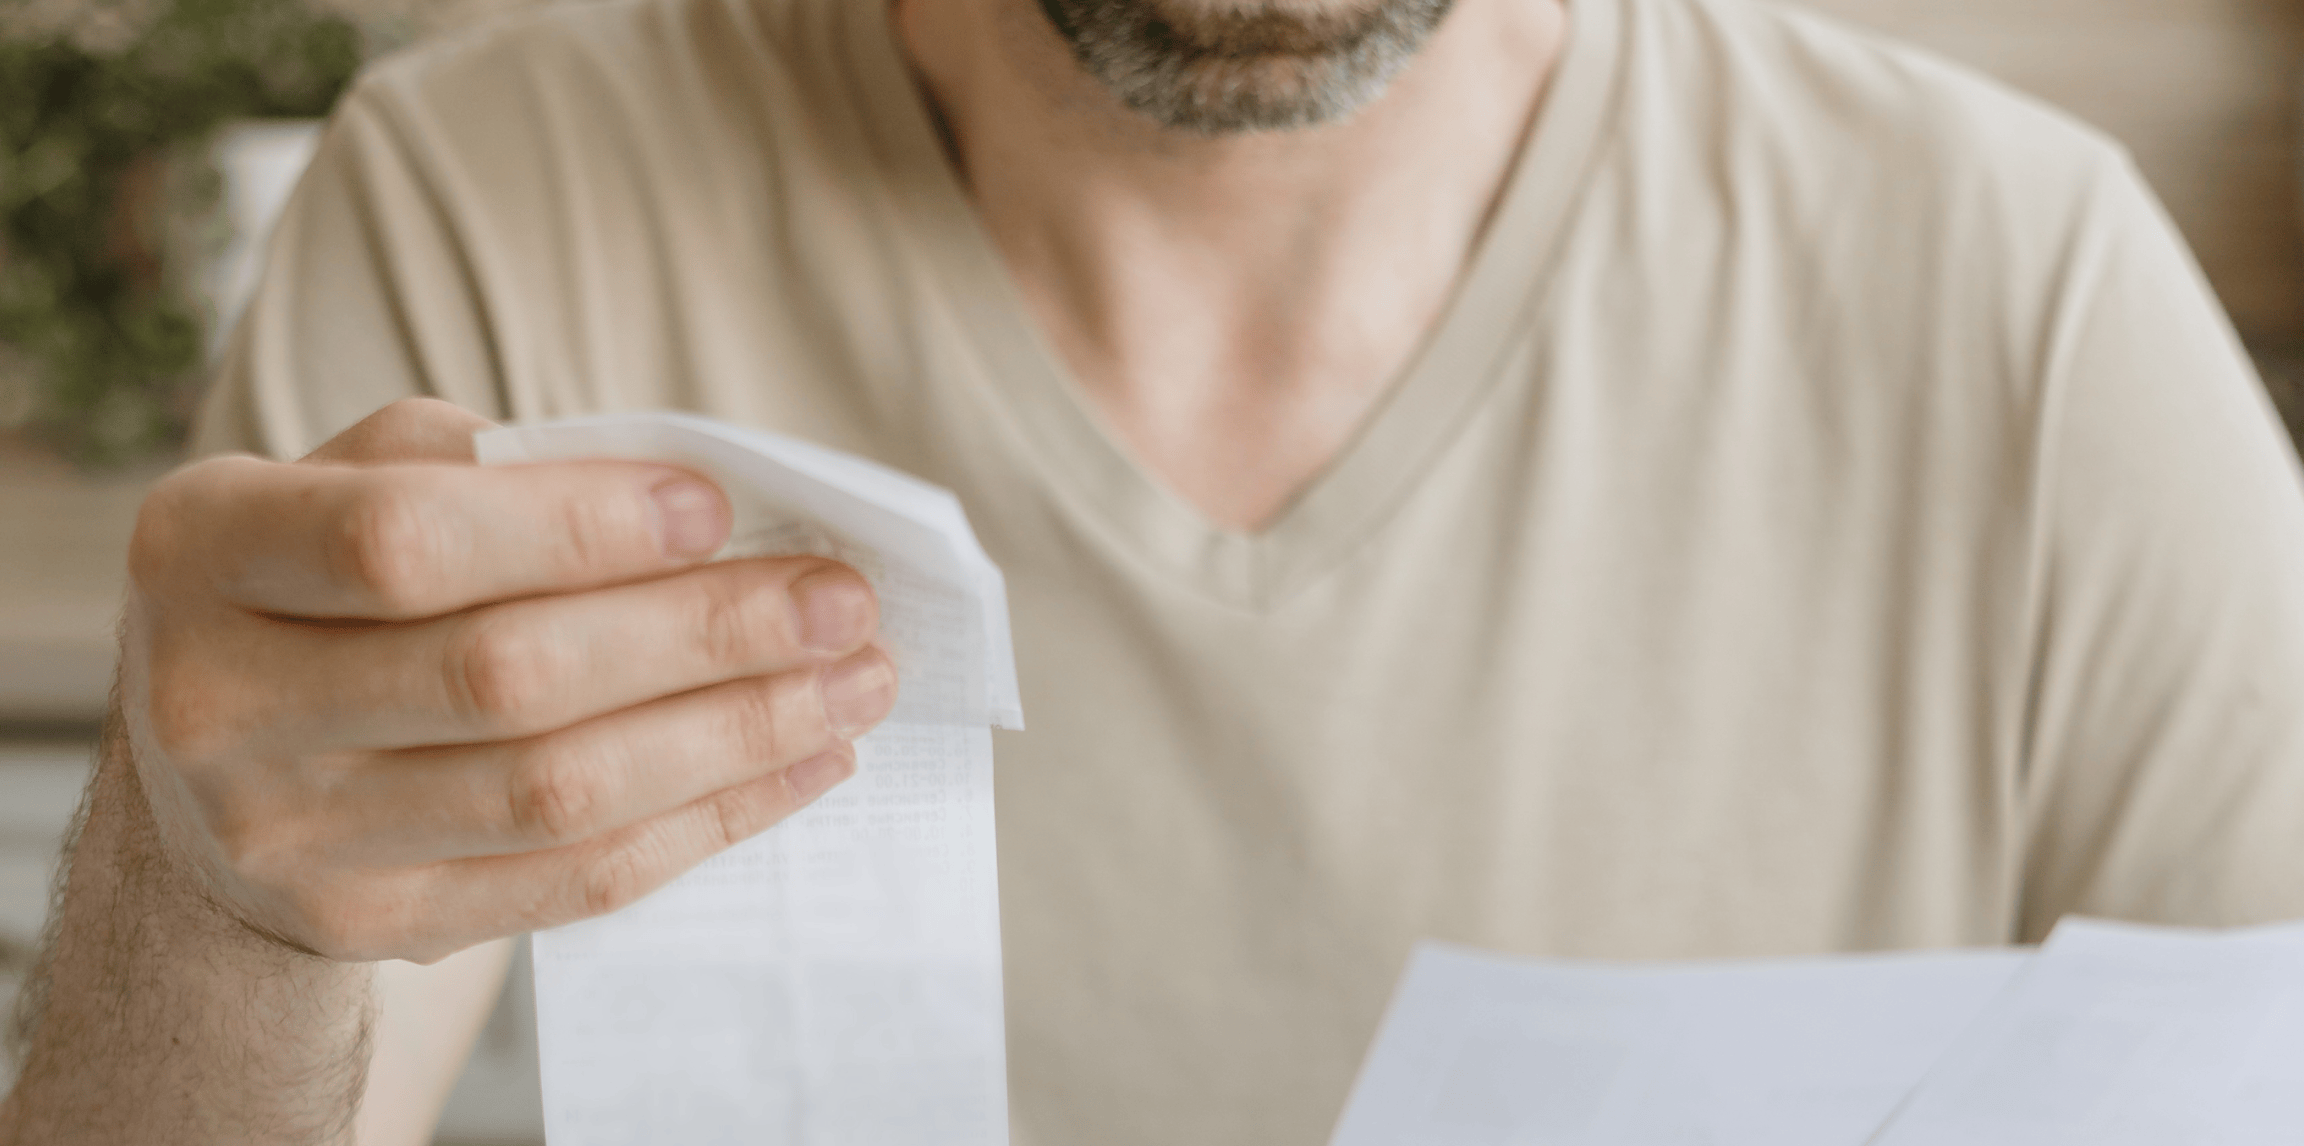 Invoice versus Receipt: Are They Identical?